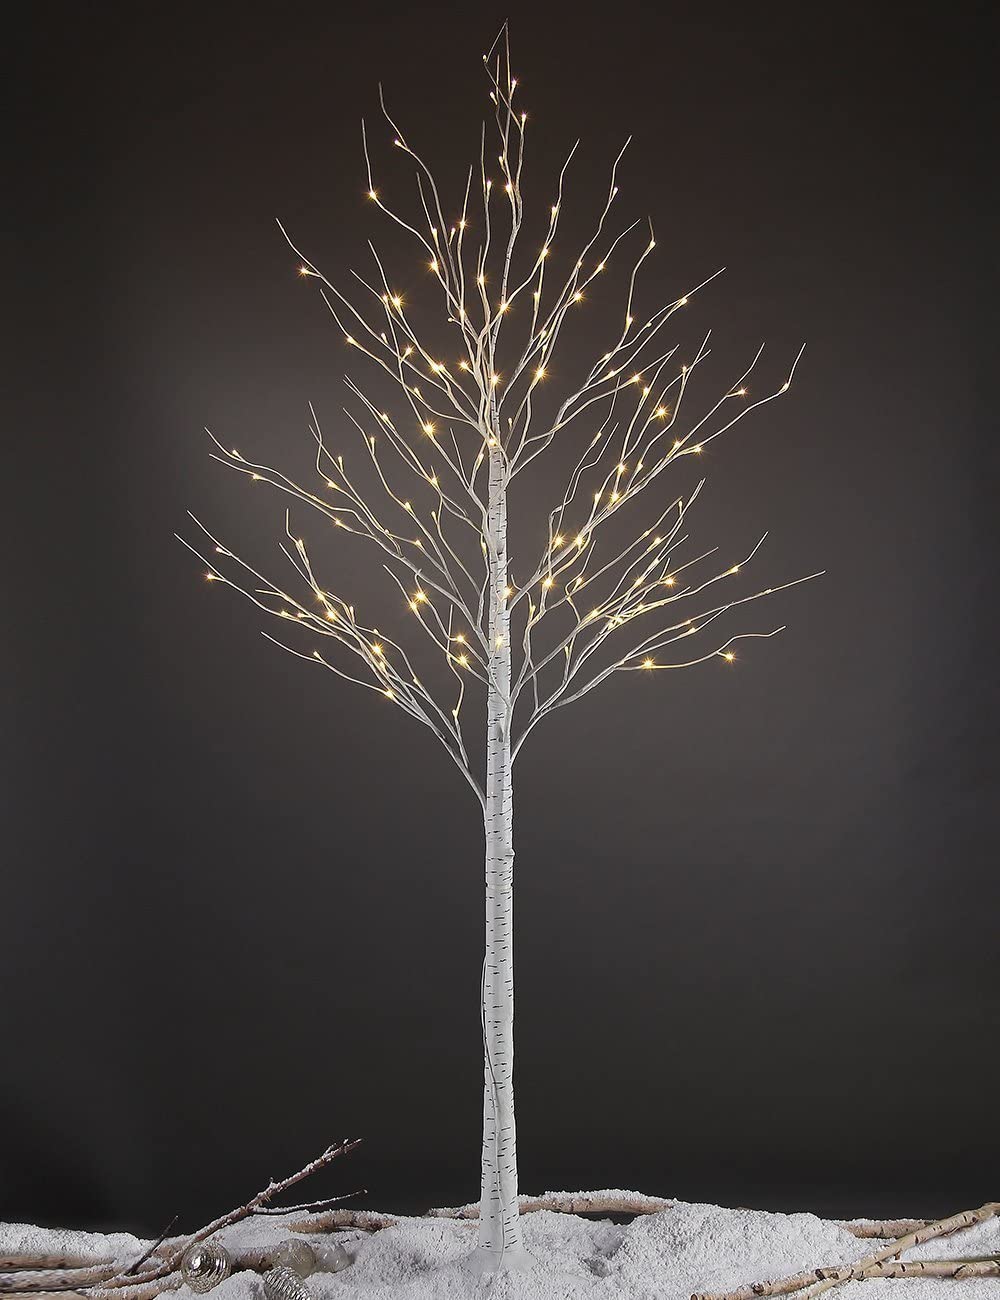 8ft Lighted Birch Tree 132 LED Artificial Tree for Decoration Inside and Outside , Home Patio Wedding Festival Christmas Decor , Warm White